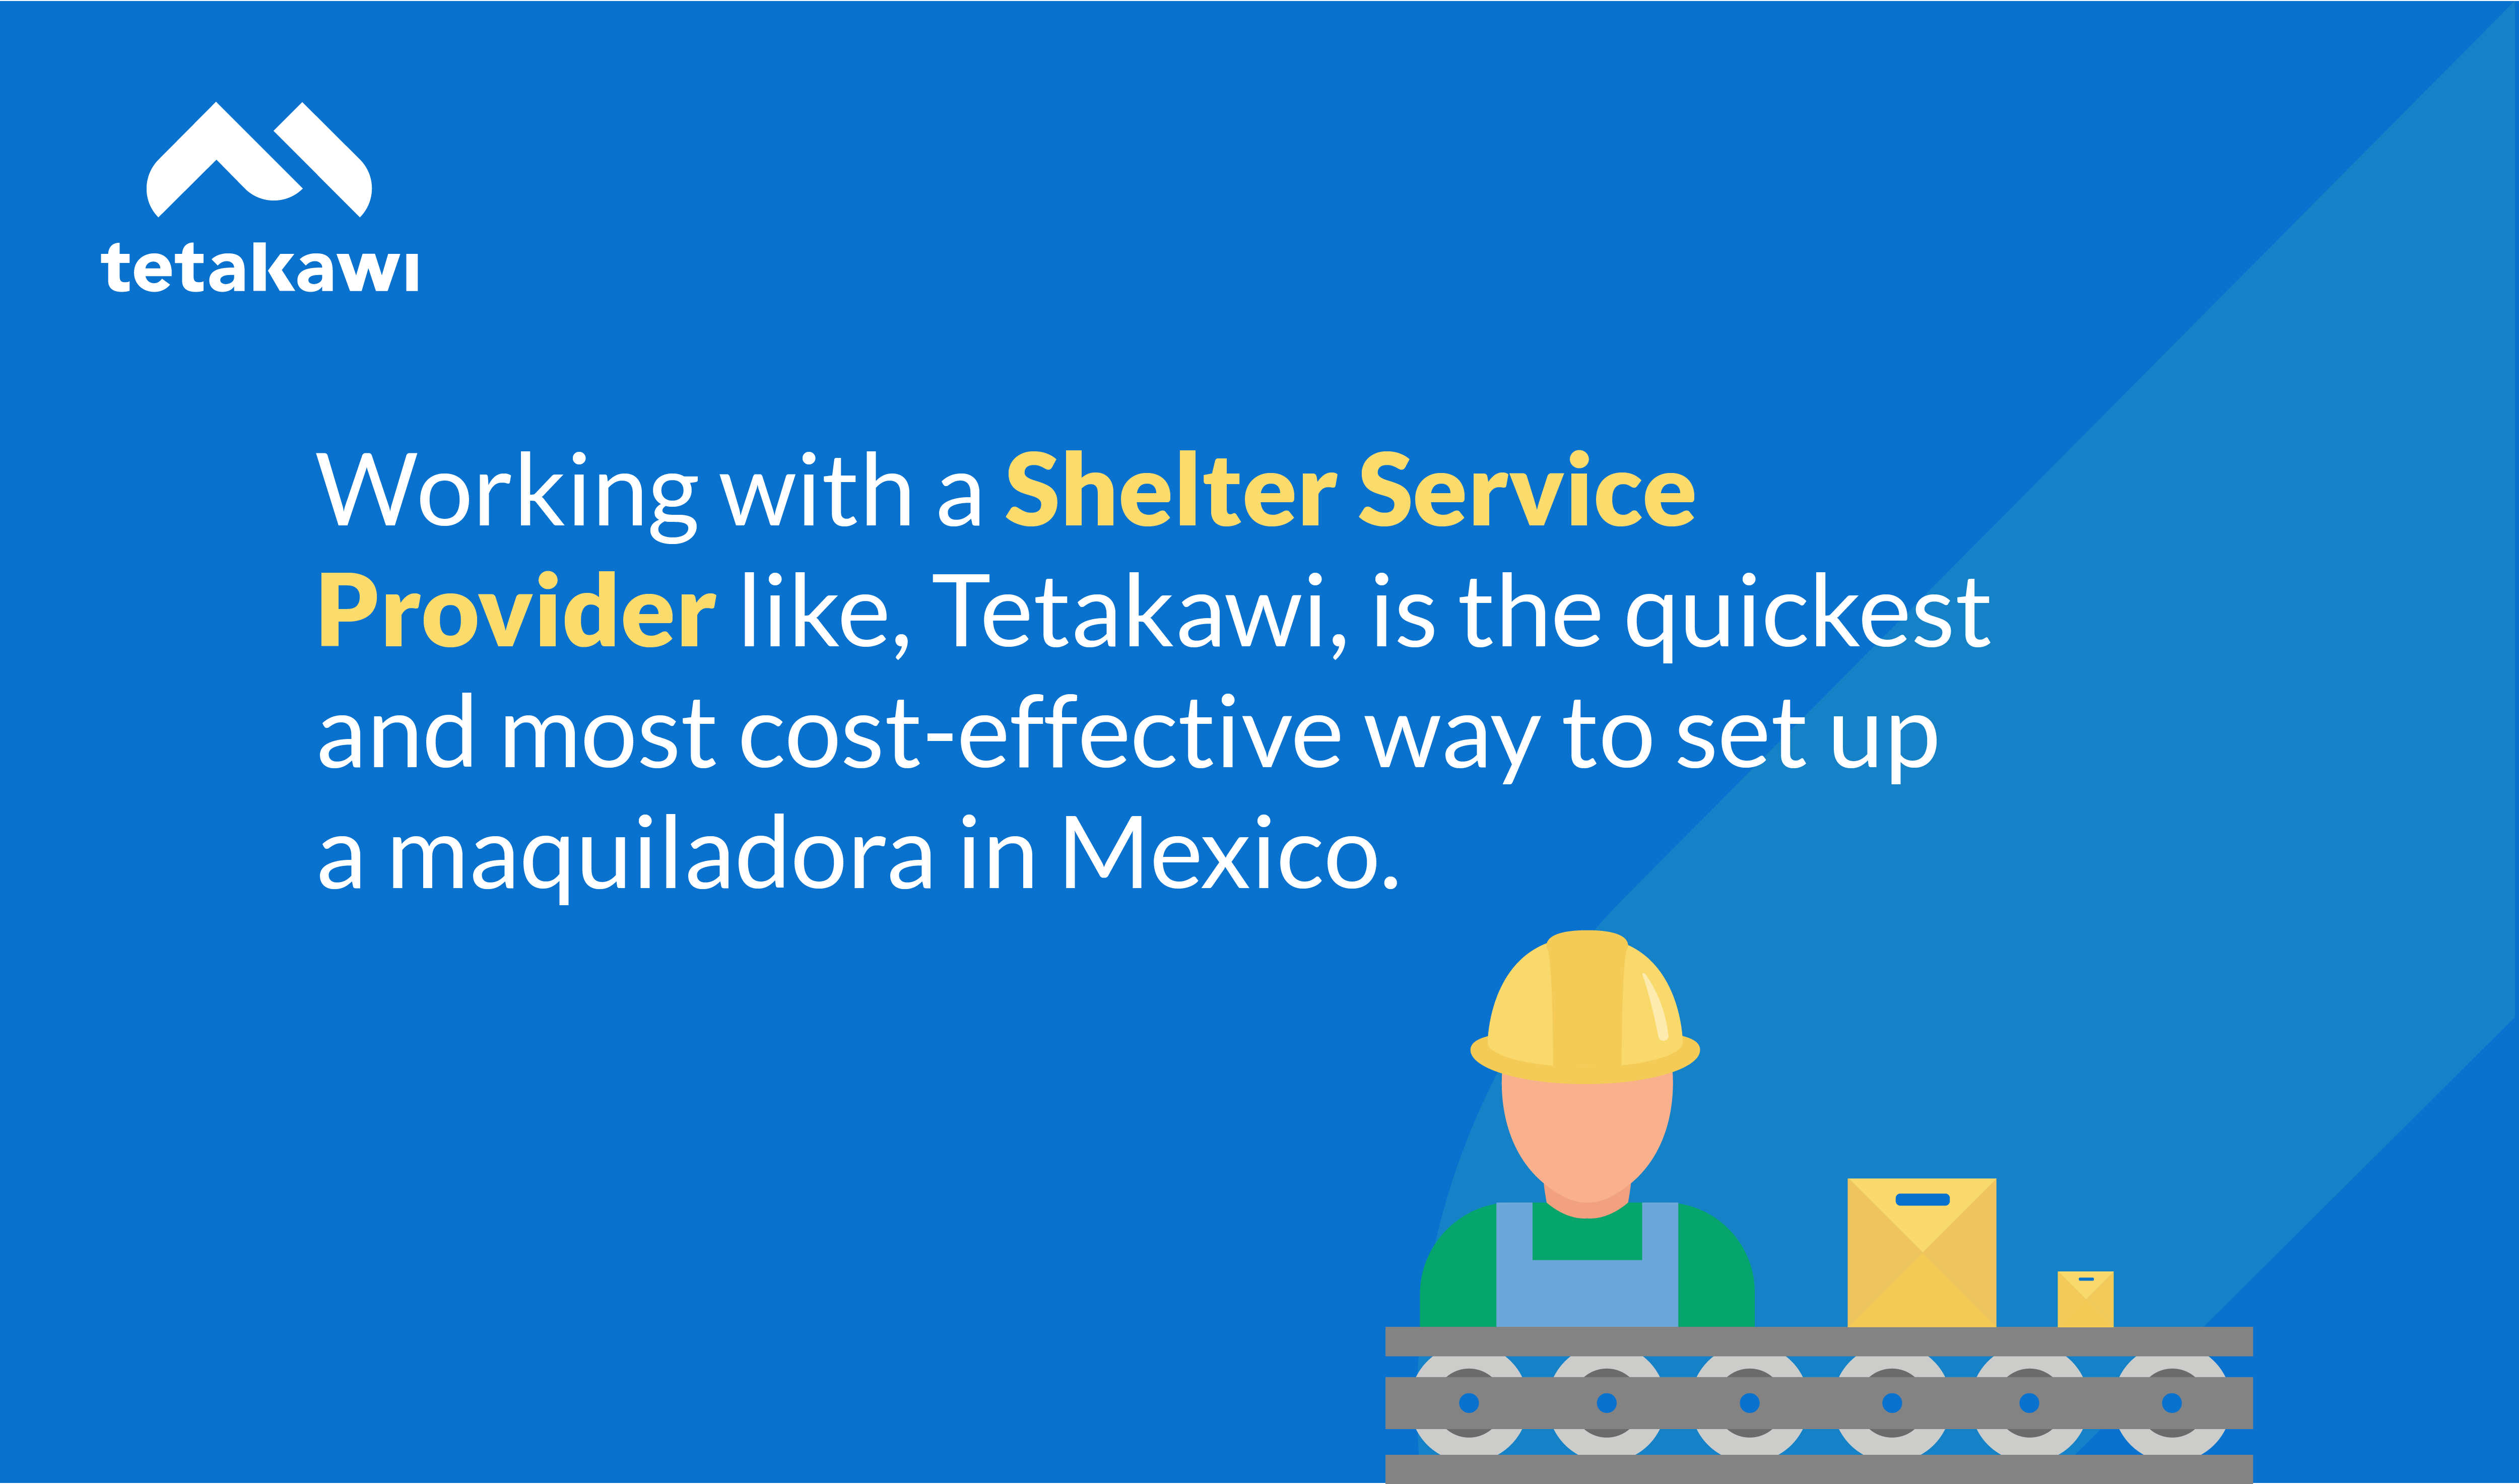 A shelter is the quickest way to set up a maquiladora